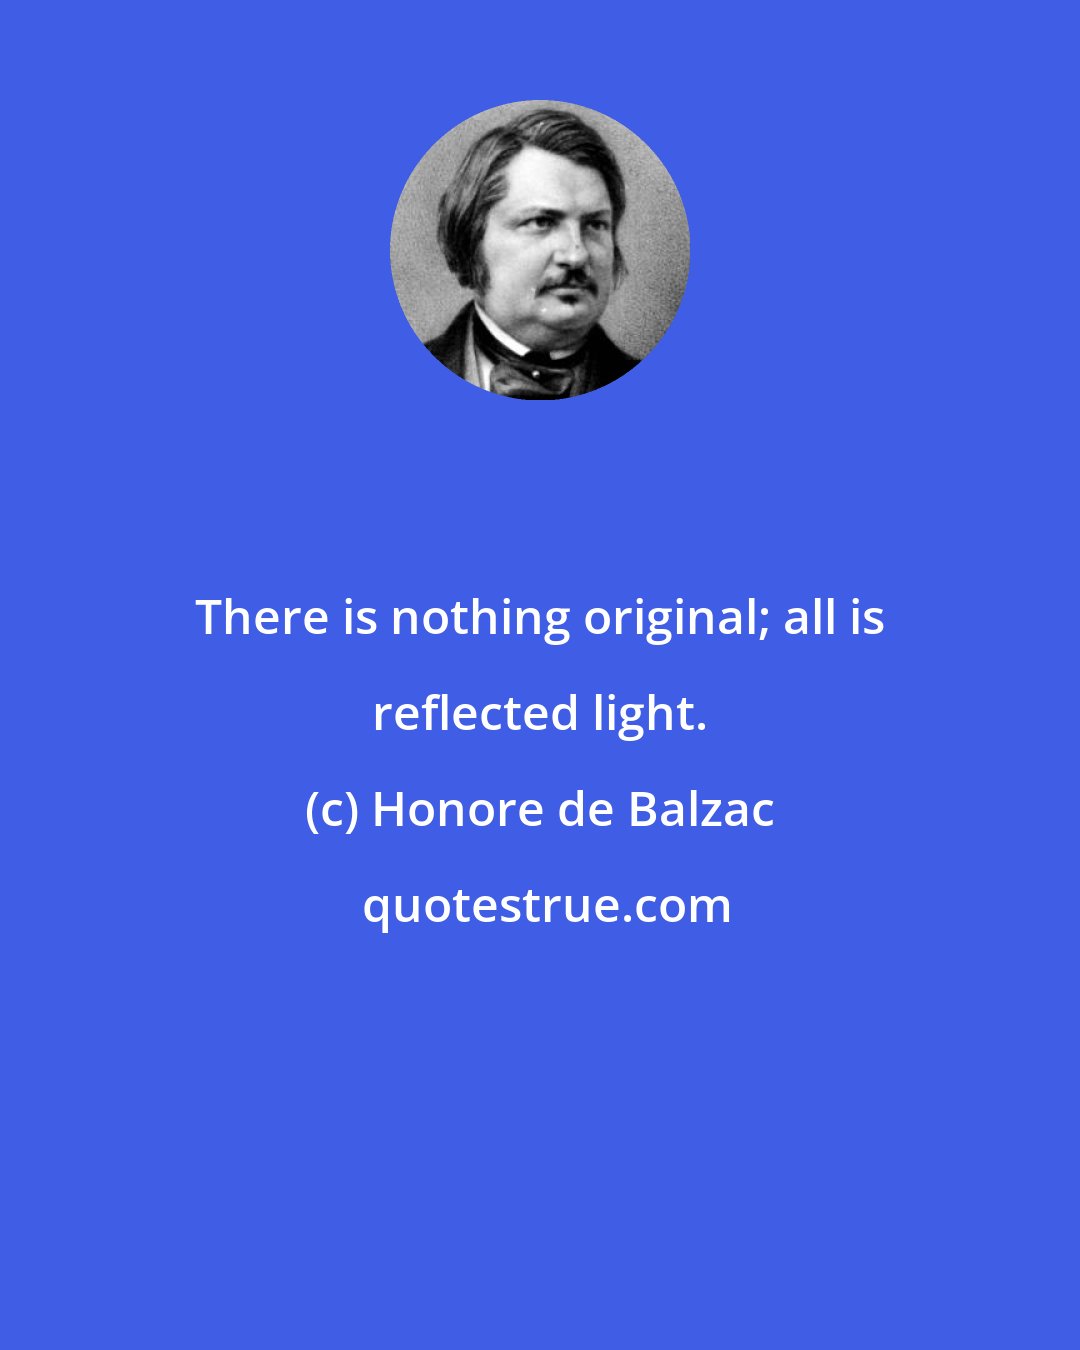 Honore de Balzac: There is nothing original; all is reflected light.